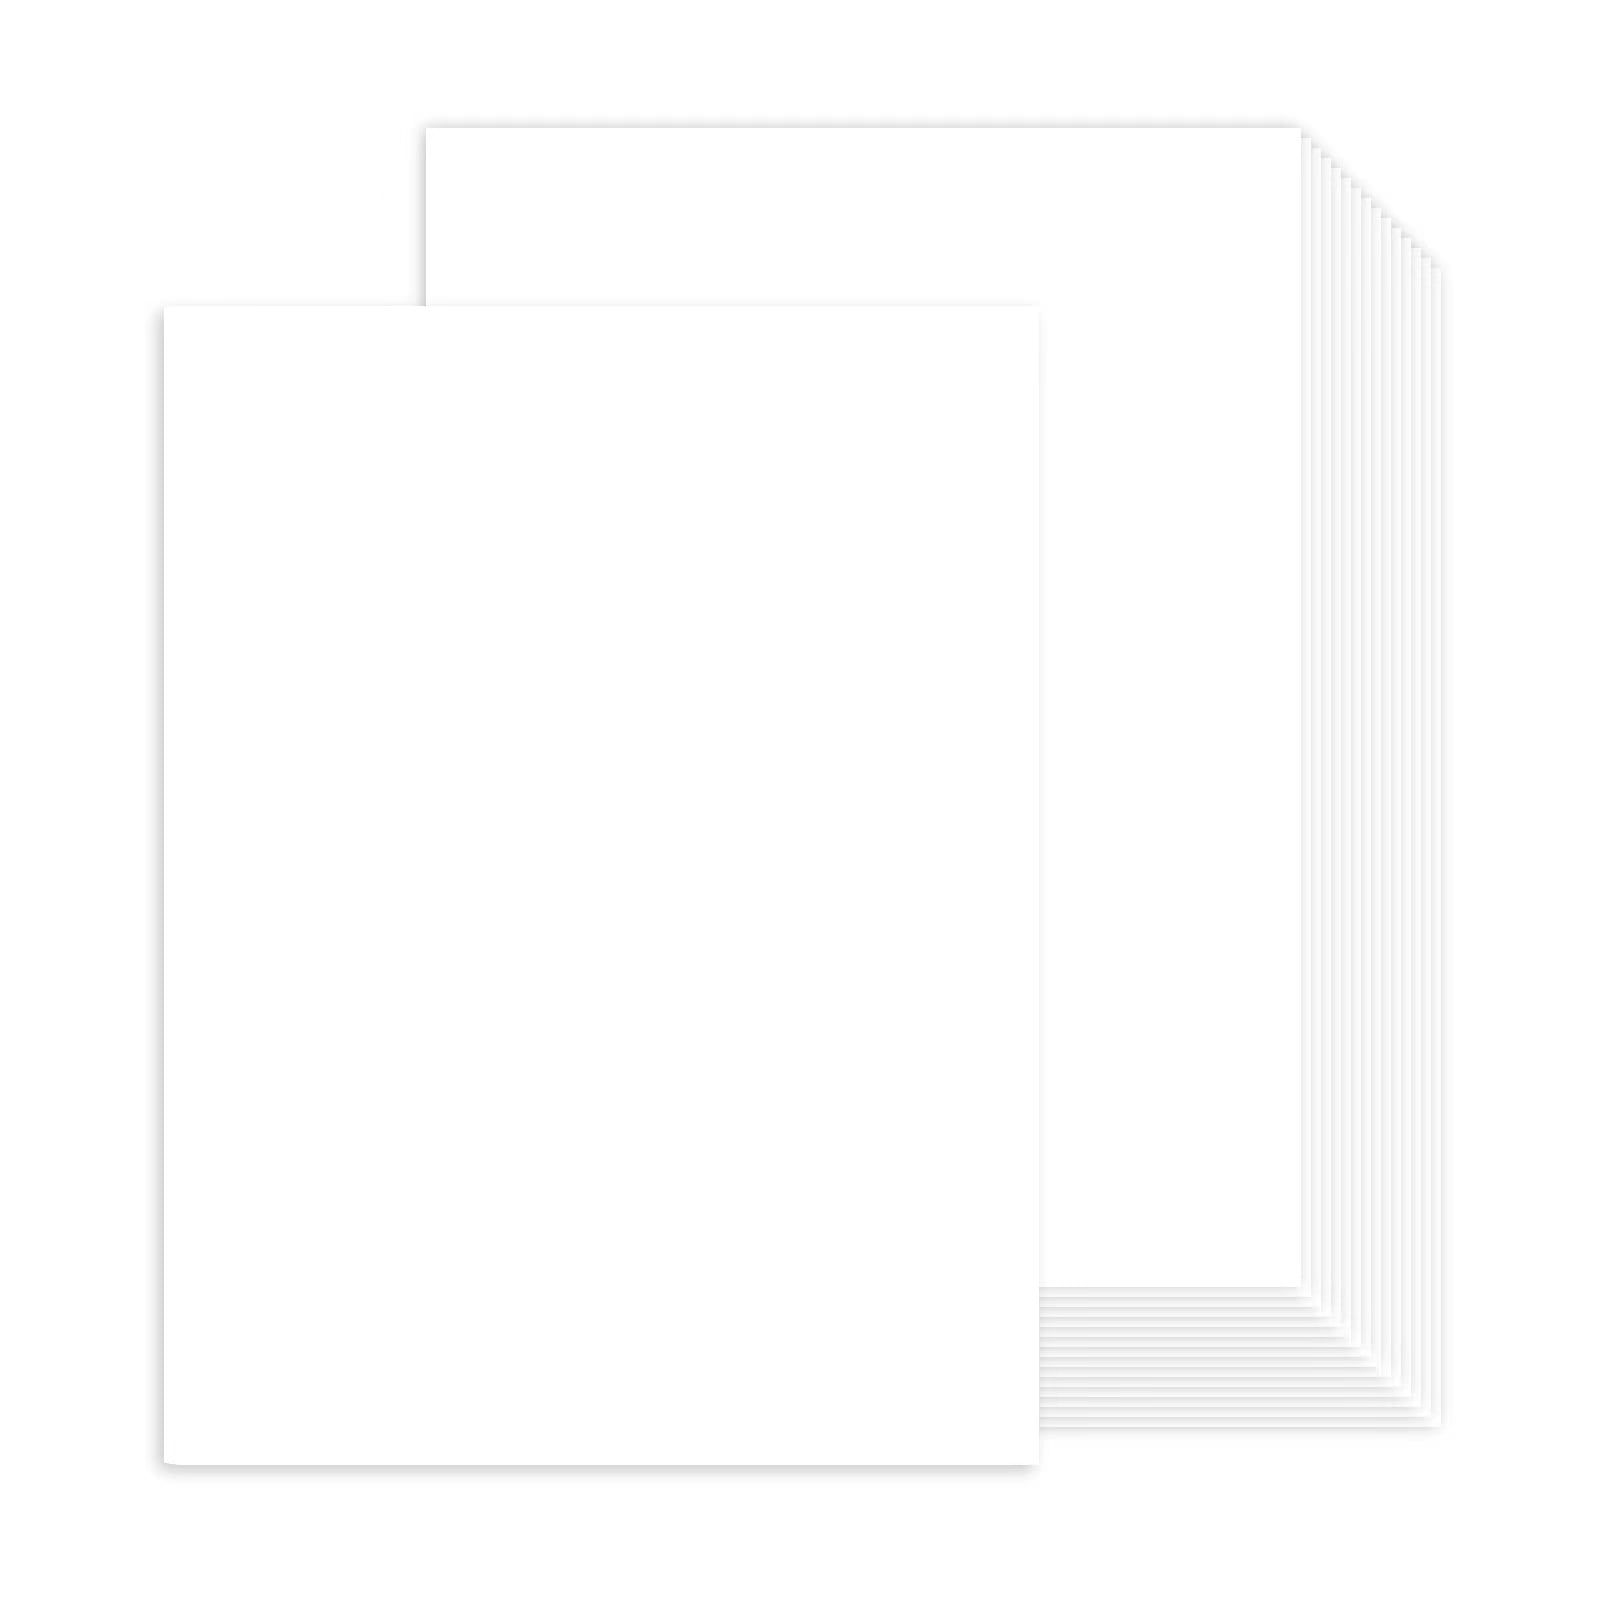 A3 White Card Stock Paper Size 11 inch.7 x 16.5 (297 x 420 mm) - Heavyweight 100lb Cover (270Gsm) - 50 Pk